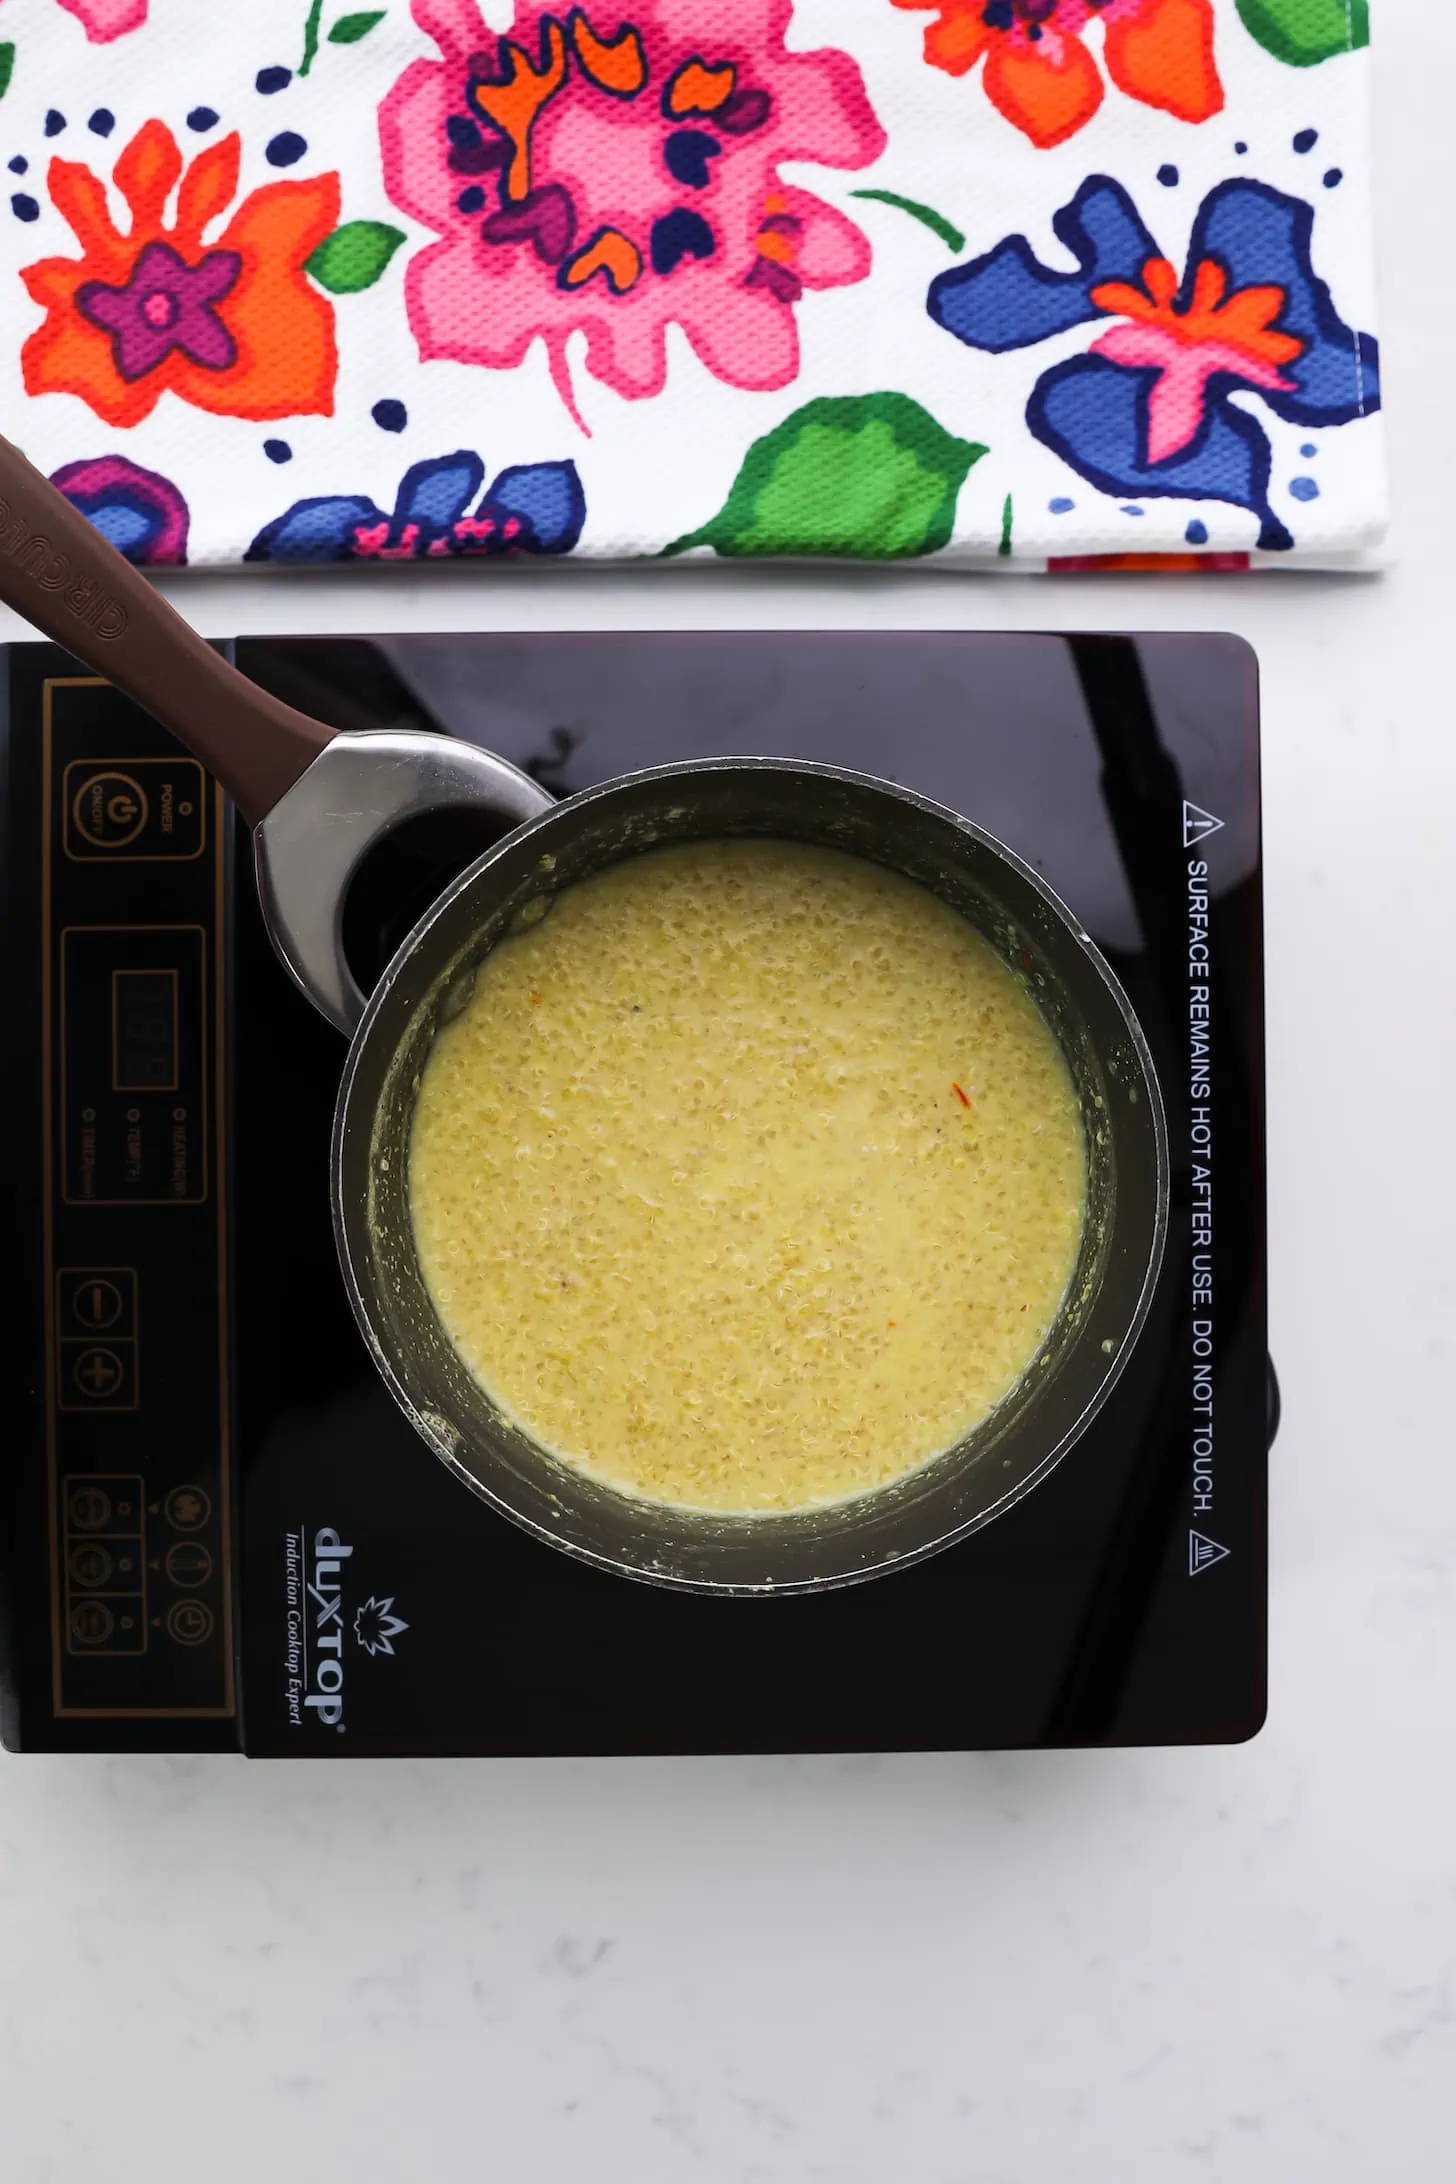 a saucepan with of yellow grainy sauce on a mobile stovetop.